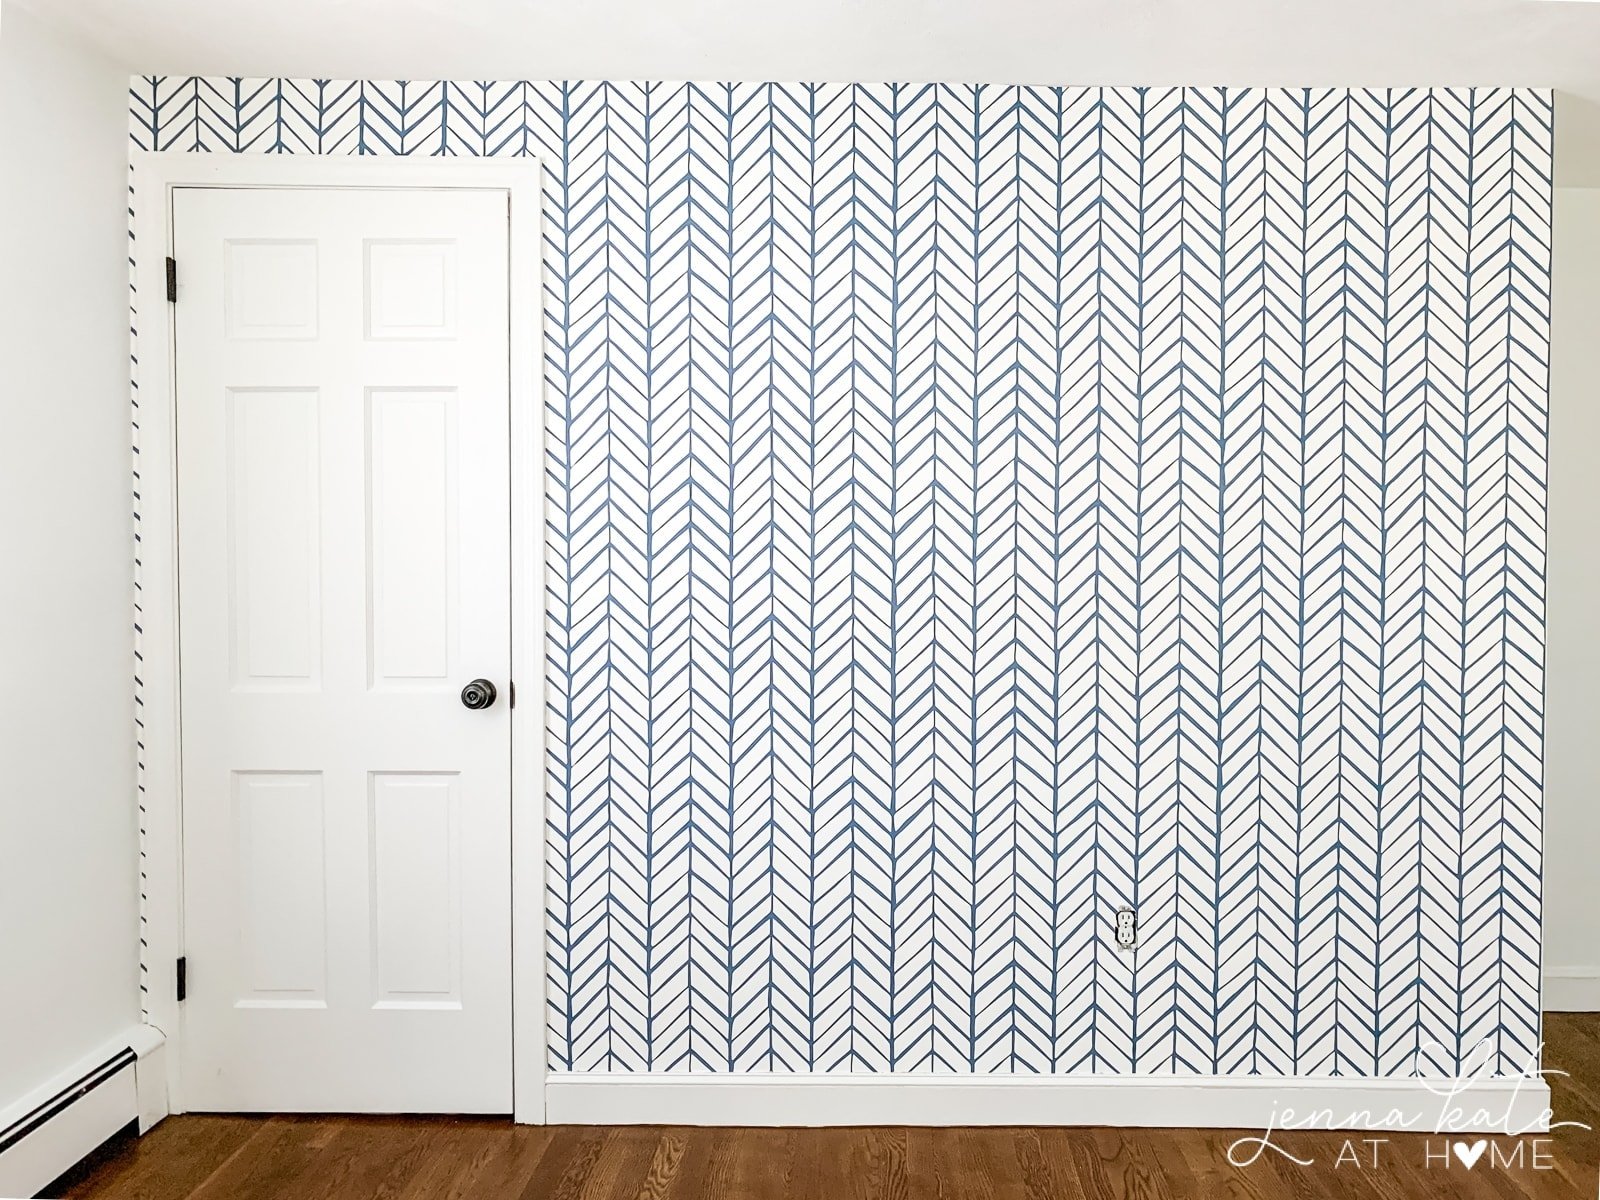 DIY Tutorial: Nursery Wallpaper Accent Wall - Jenna Kate at Home